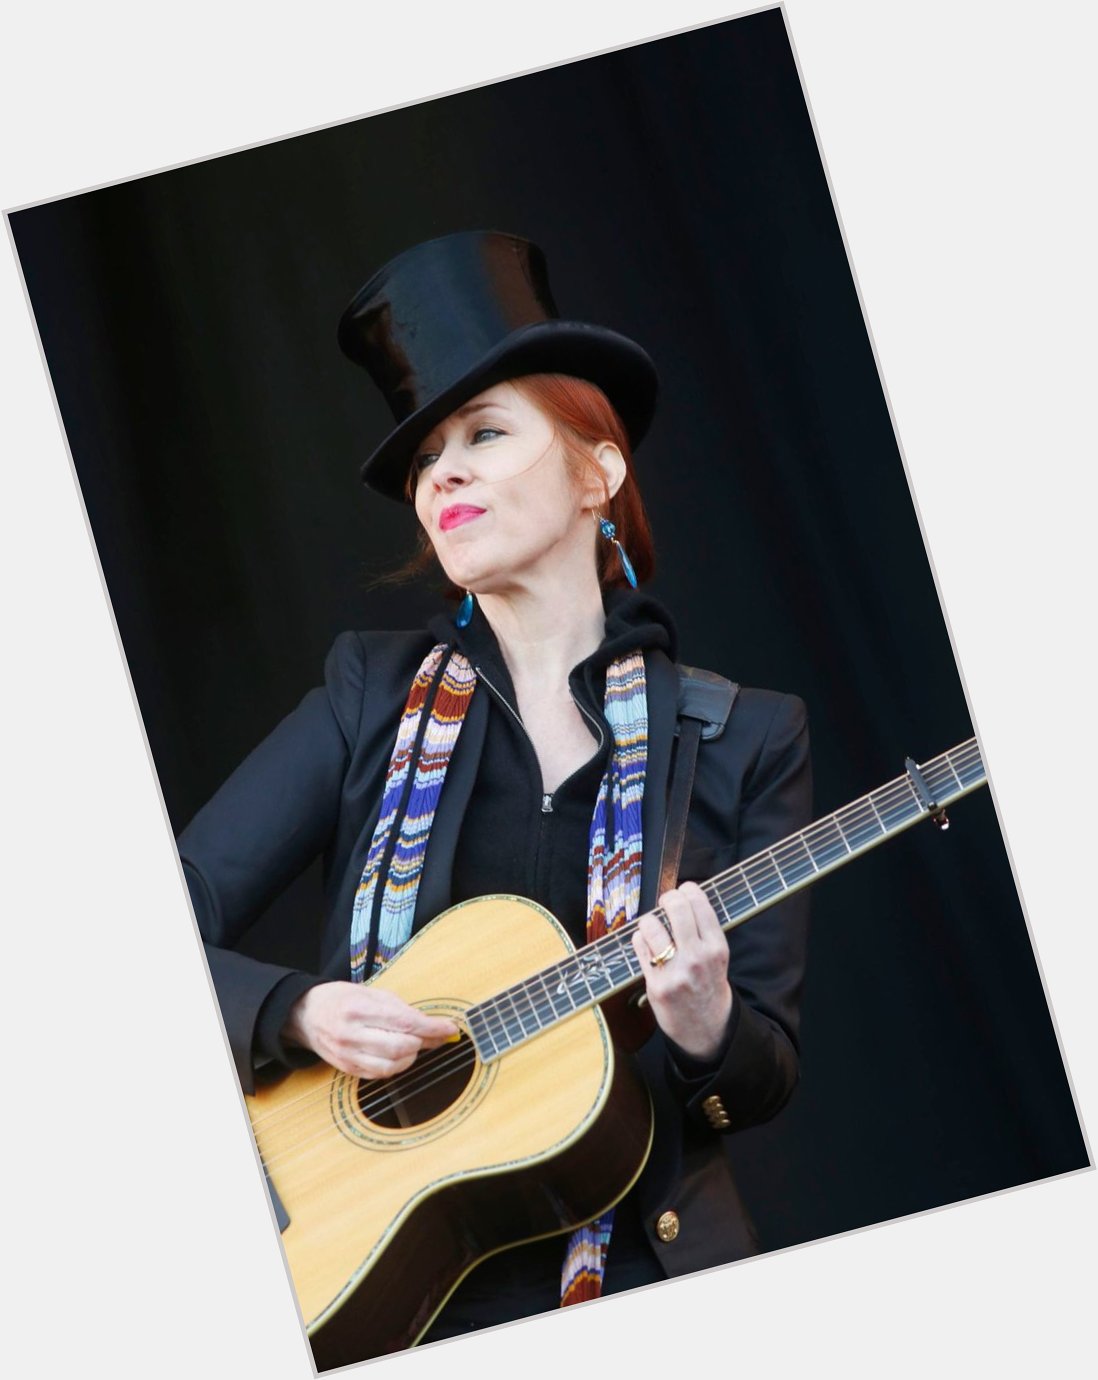 Happy birthday American singer-songwriter, musician and record producer Suzanne Vega, born July 11, 1959. 